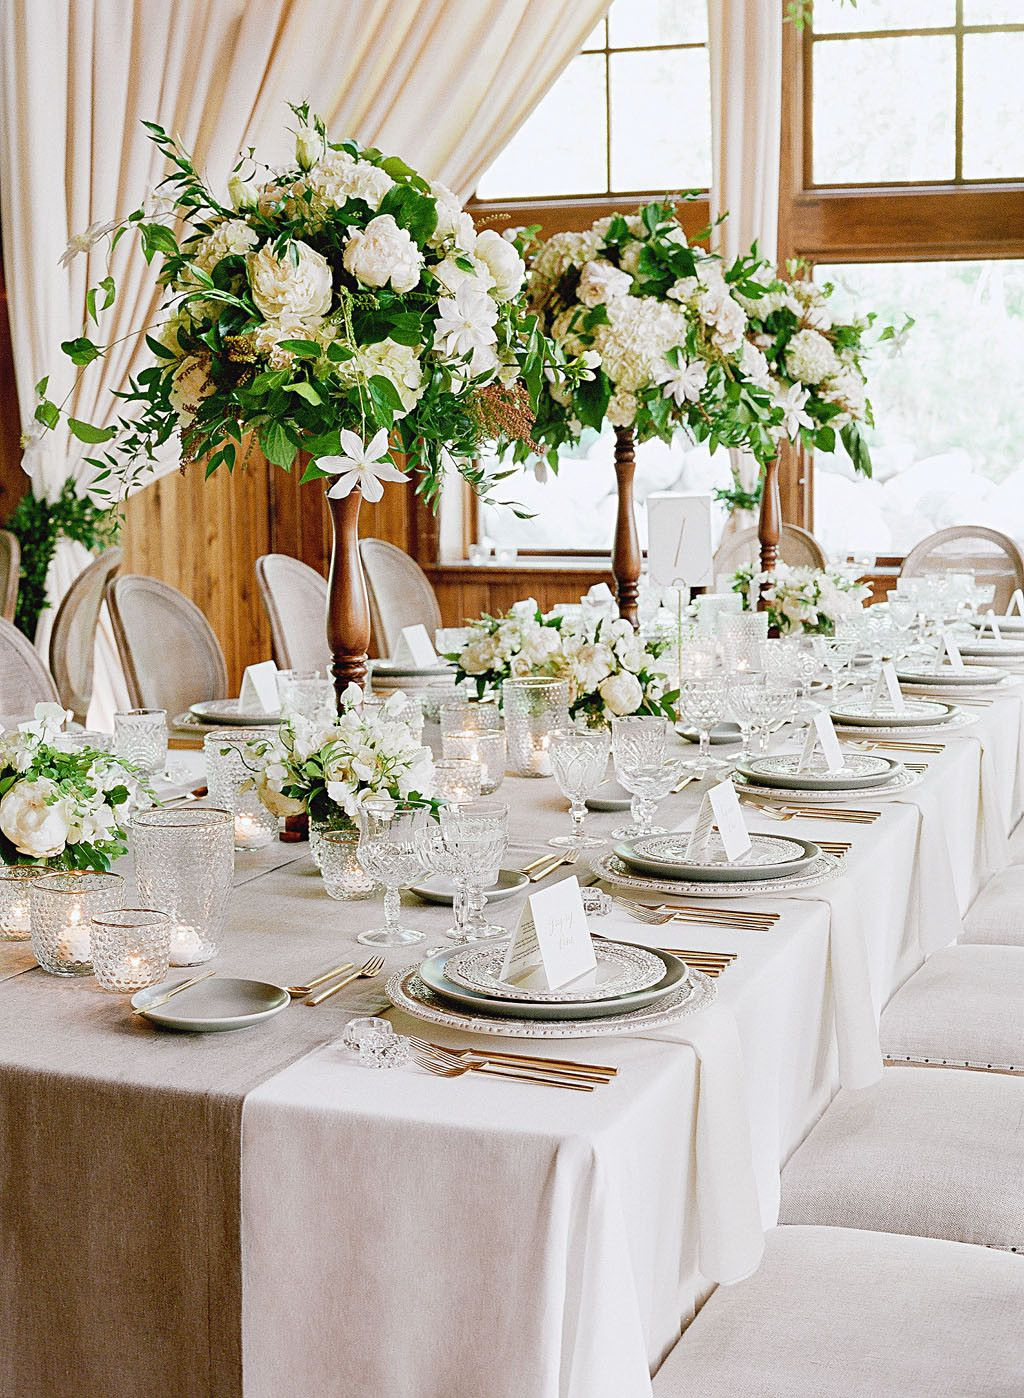 23 Famous Cheap Tall White Vases 2024 free download cheap tall white vases of 79 white wedding centerpieces blairs bridal shower ideas regarding custom vases and tall white floral arrangements offered up an extra dose of elegance to this coup